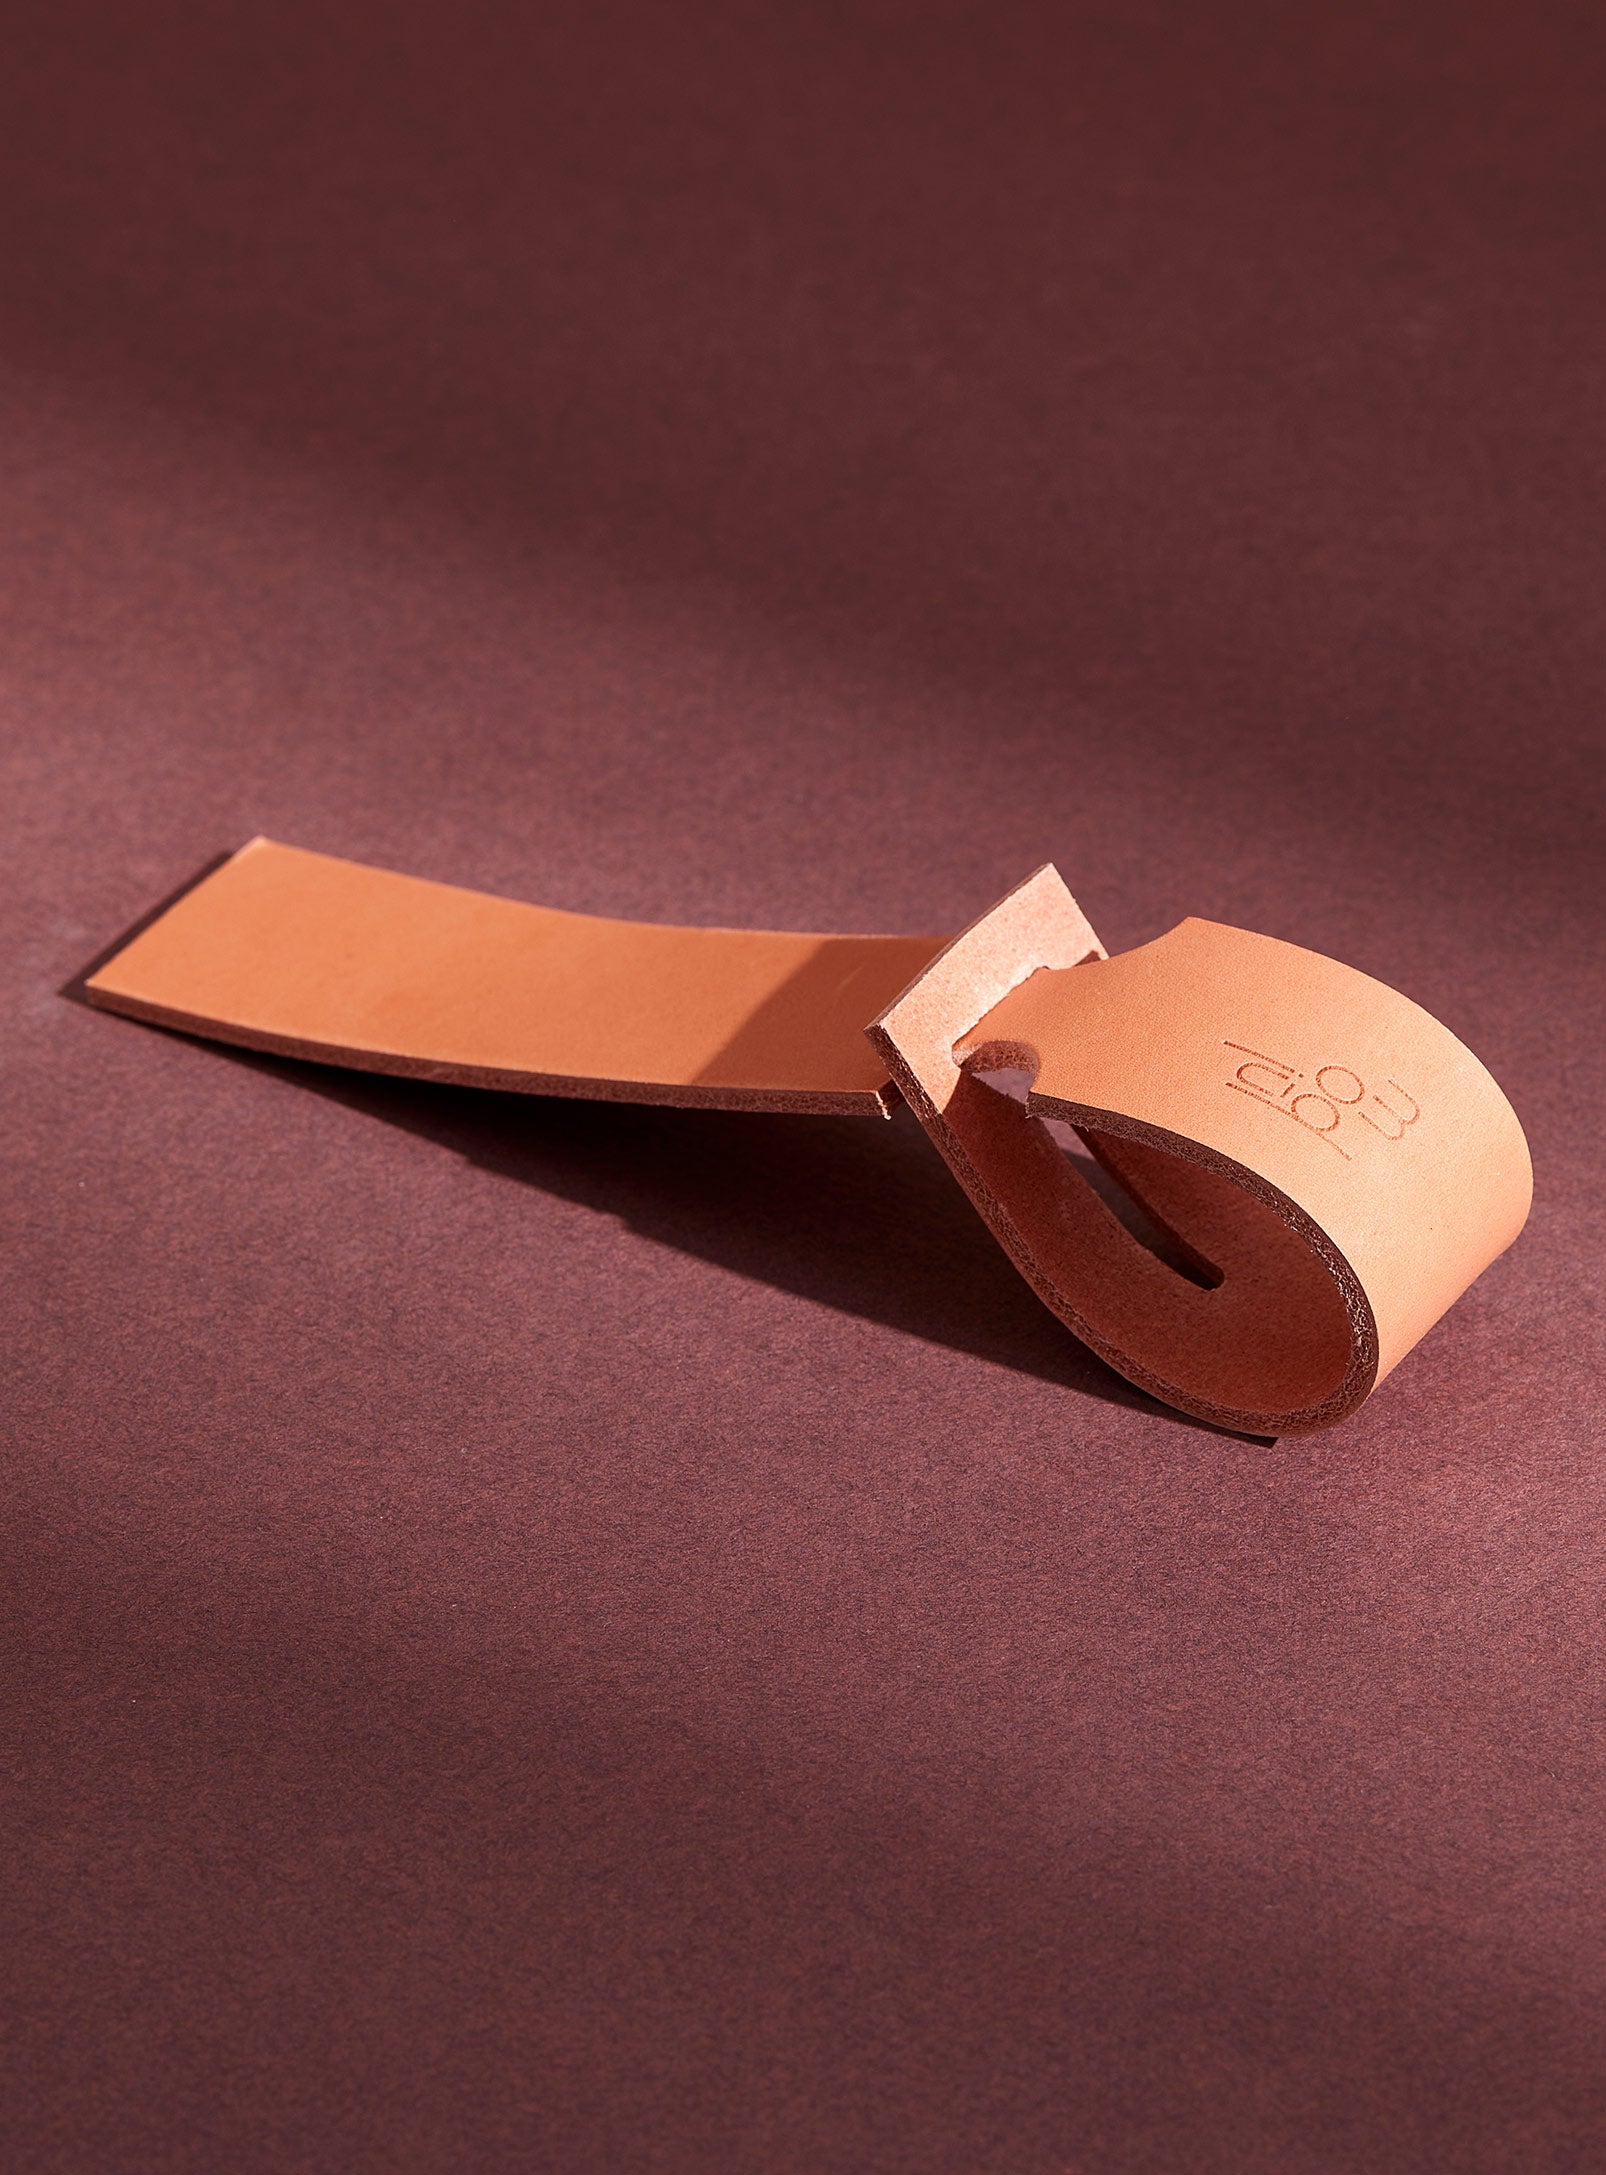 The modjūl leather traveller’s tag in pink. A luggage tag constructed using quality vegetable-dyed Italian leather with the option for personalization.